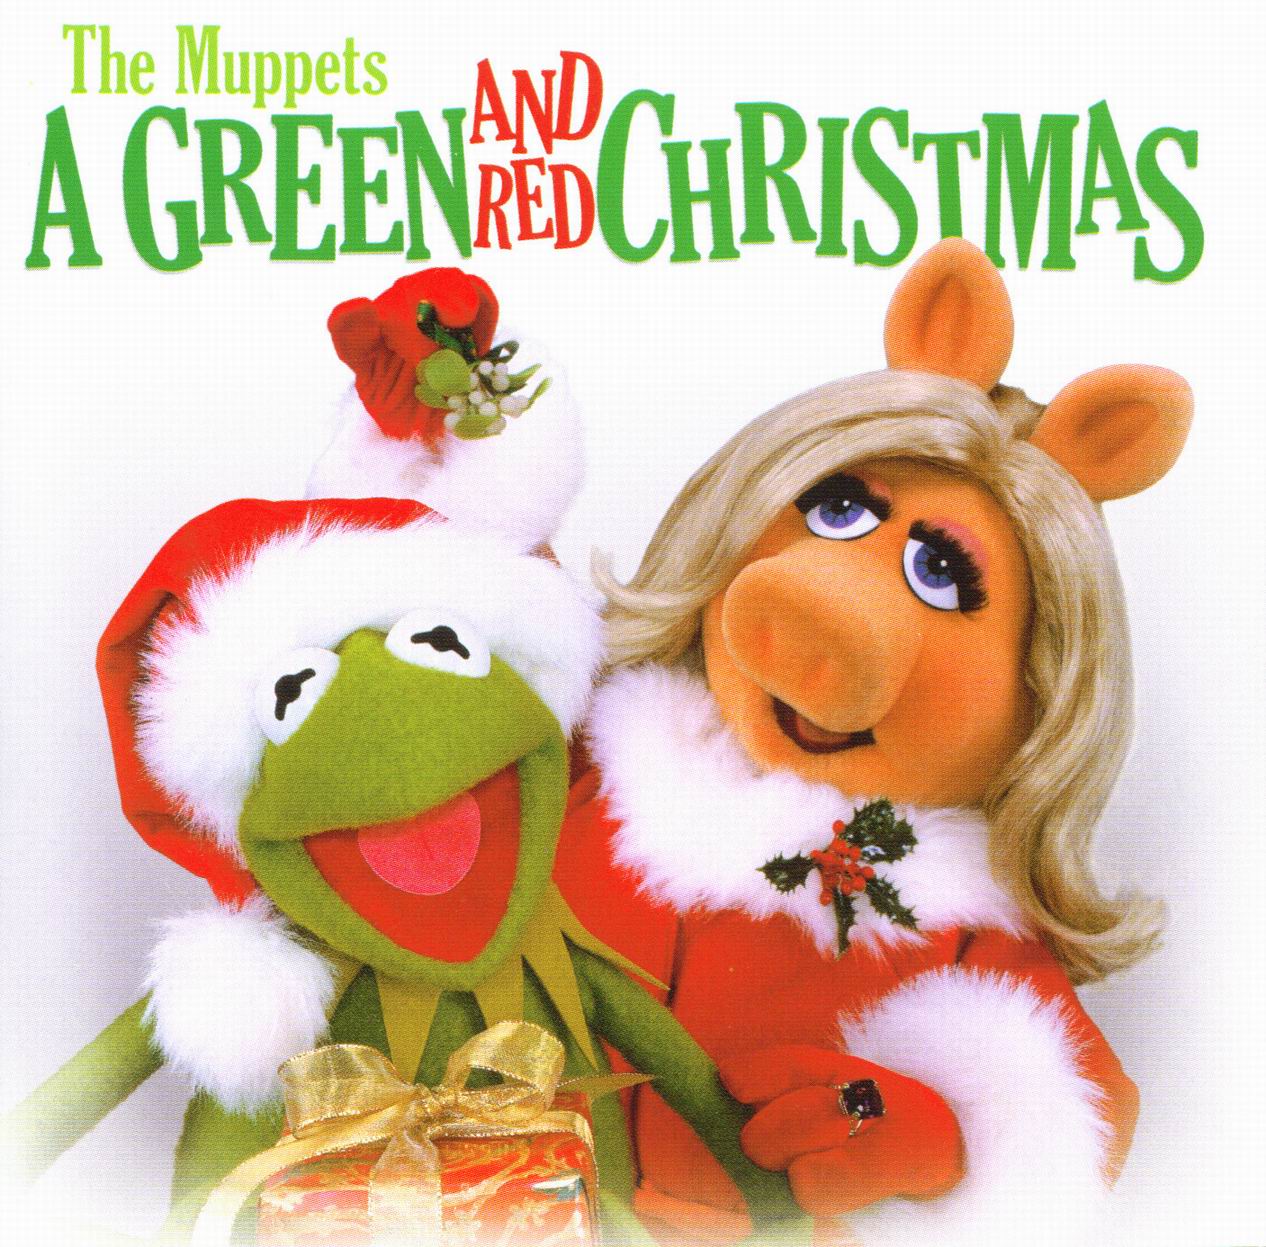 [Muppets+A+Green+and+Red+xmas.jpg]